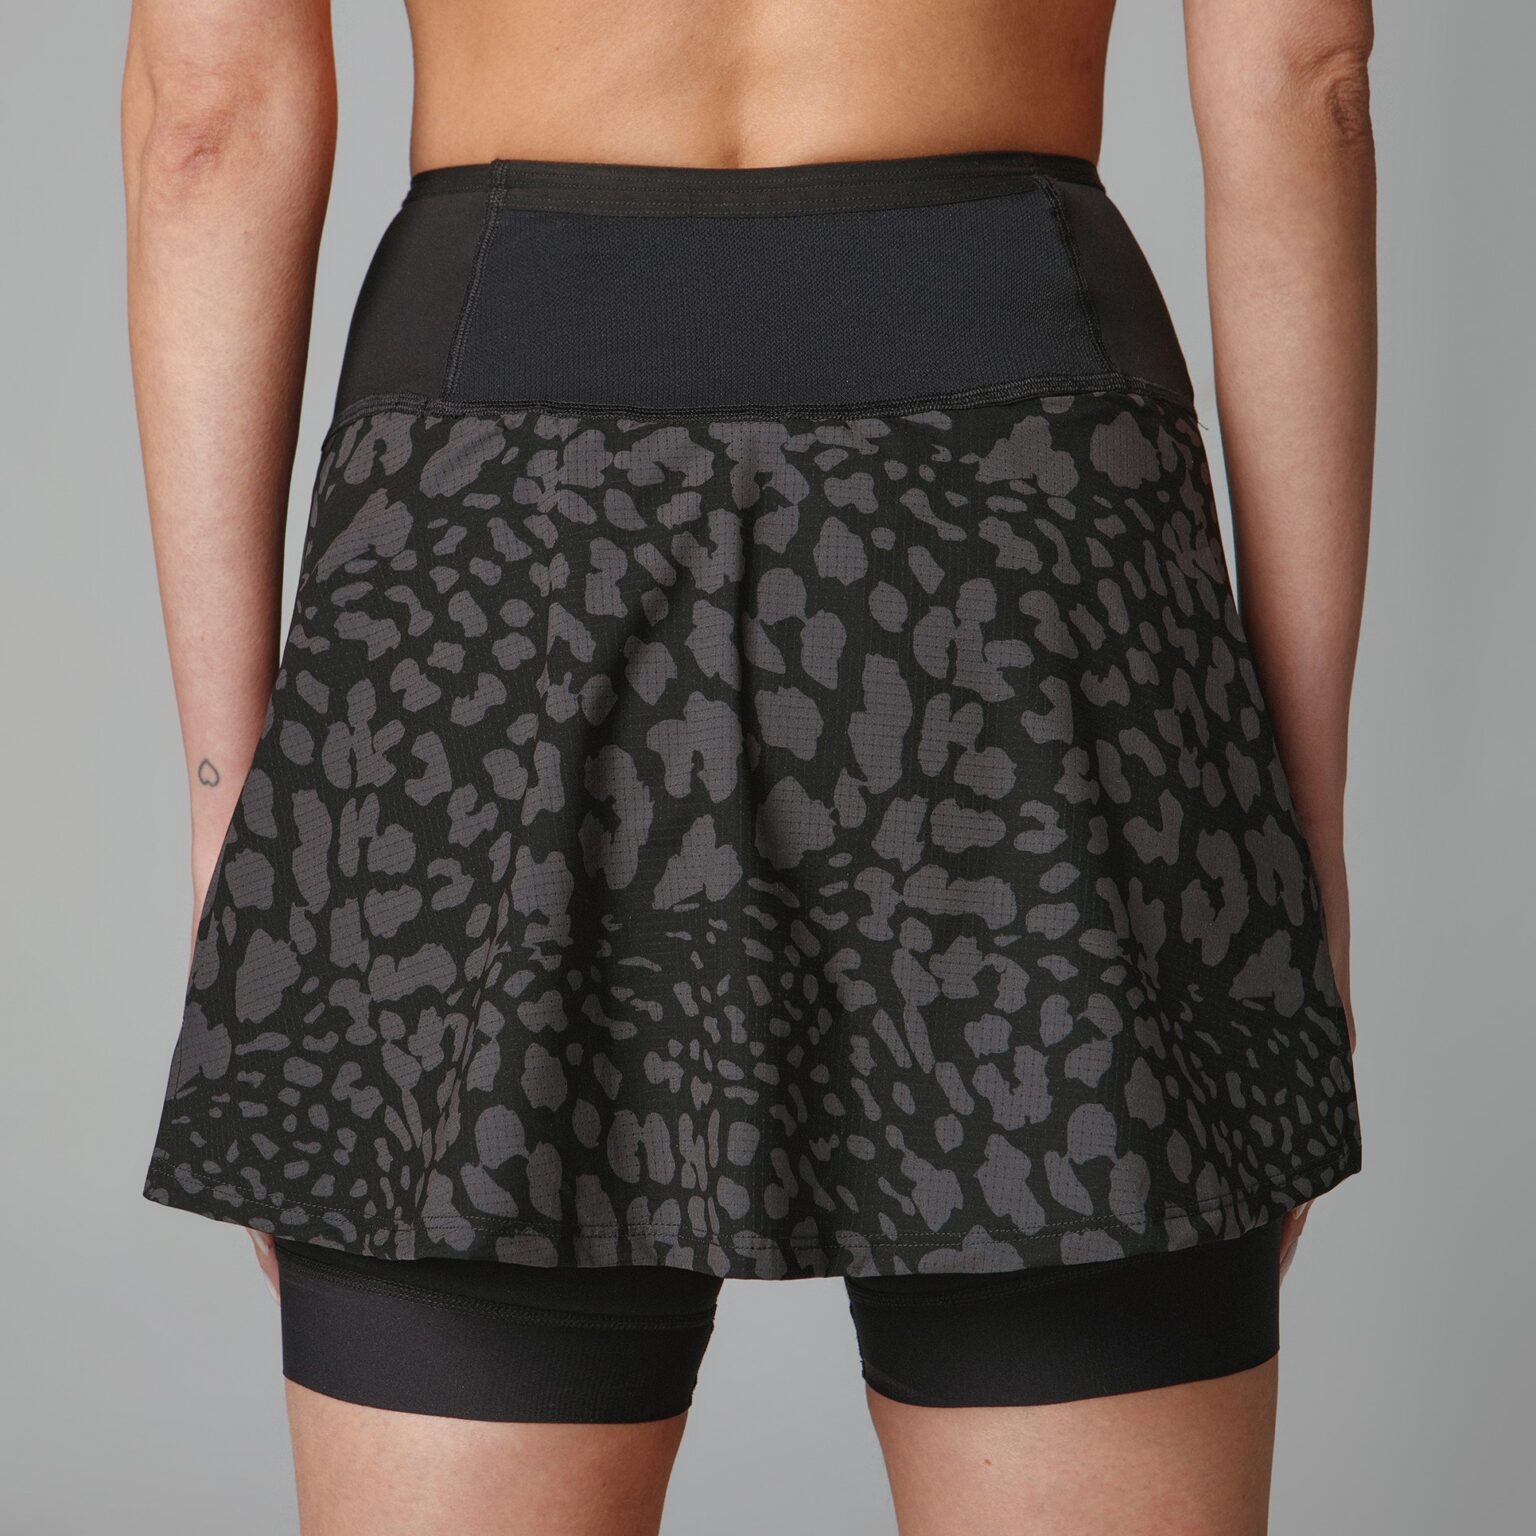 A model in a black and gray running skirt with built-in shorts and back pockets. All made of high-performance fabrics.